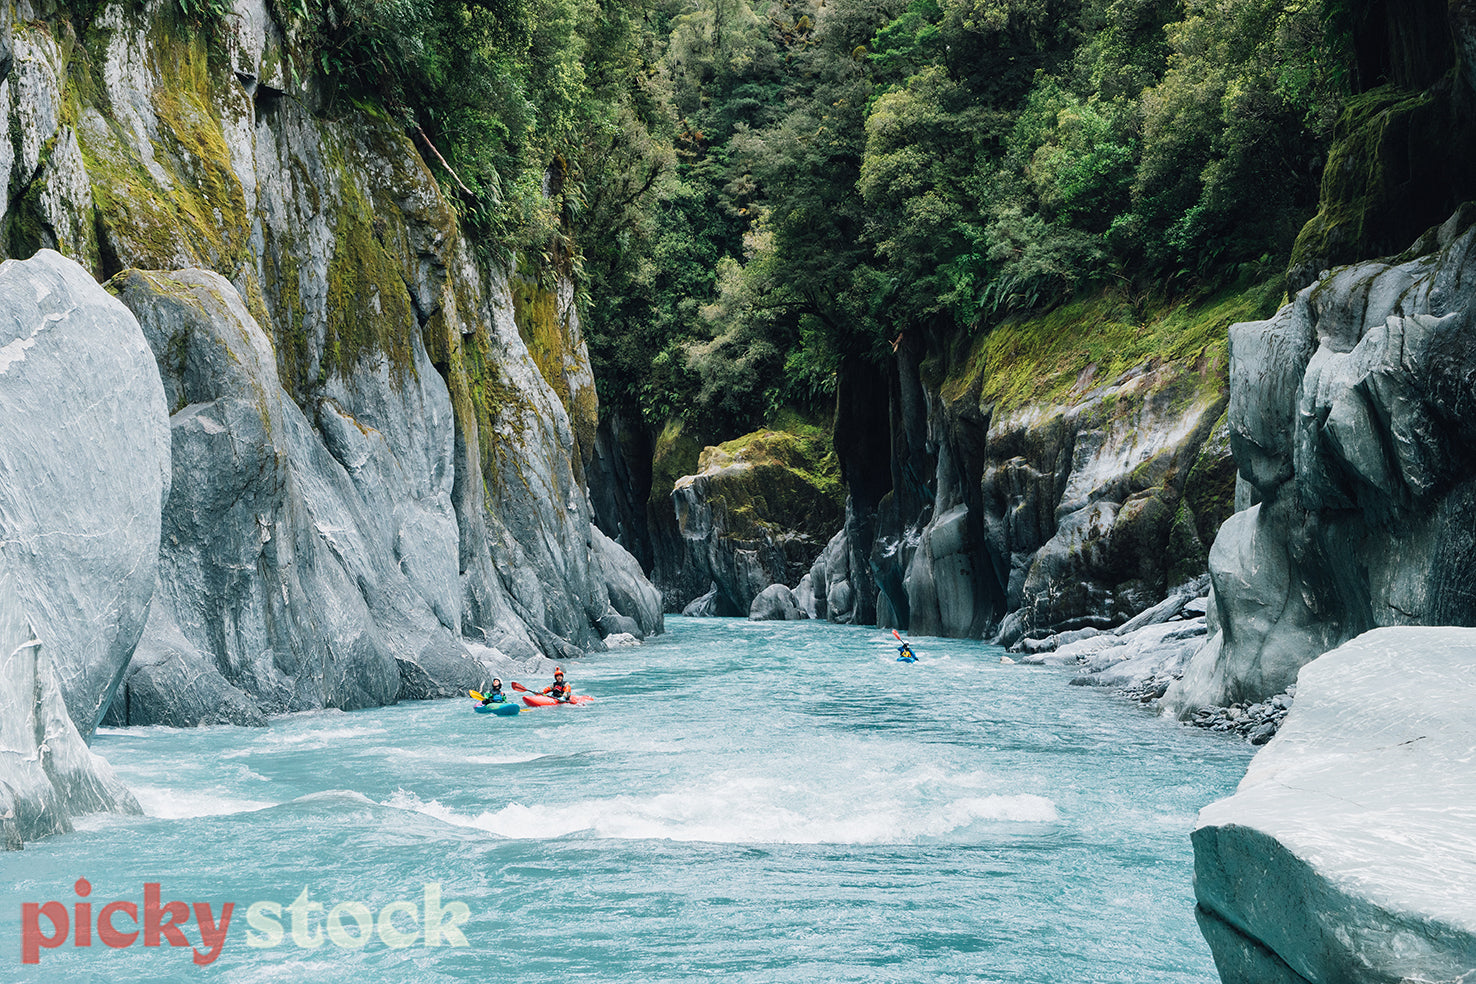 Three whitewater kayakers enjoying a beautiful river gorge on a glacial river